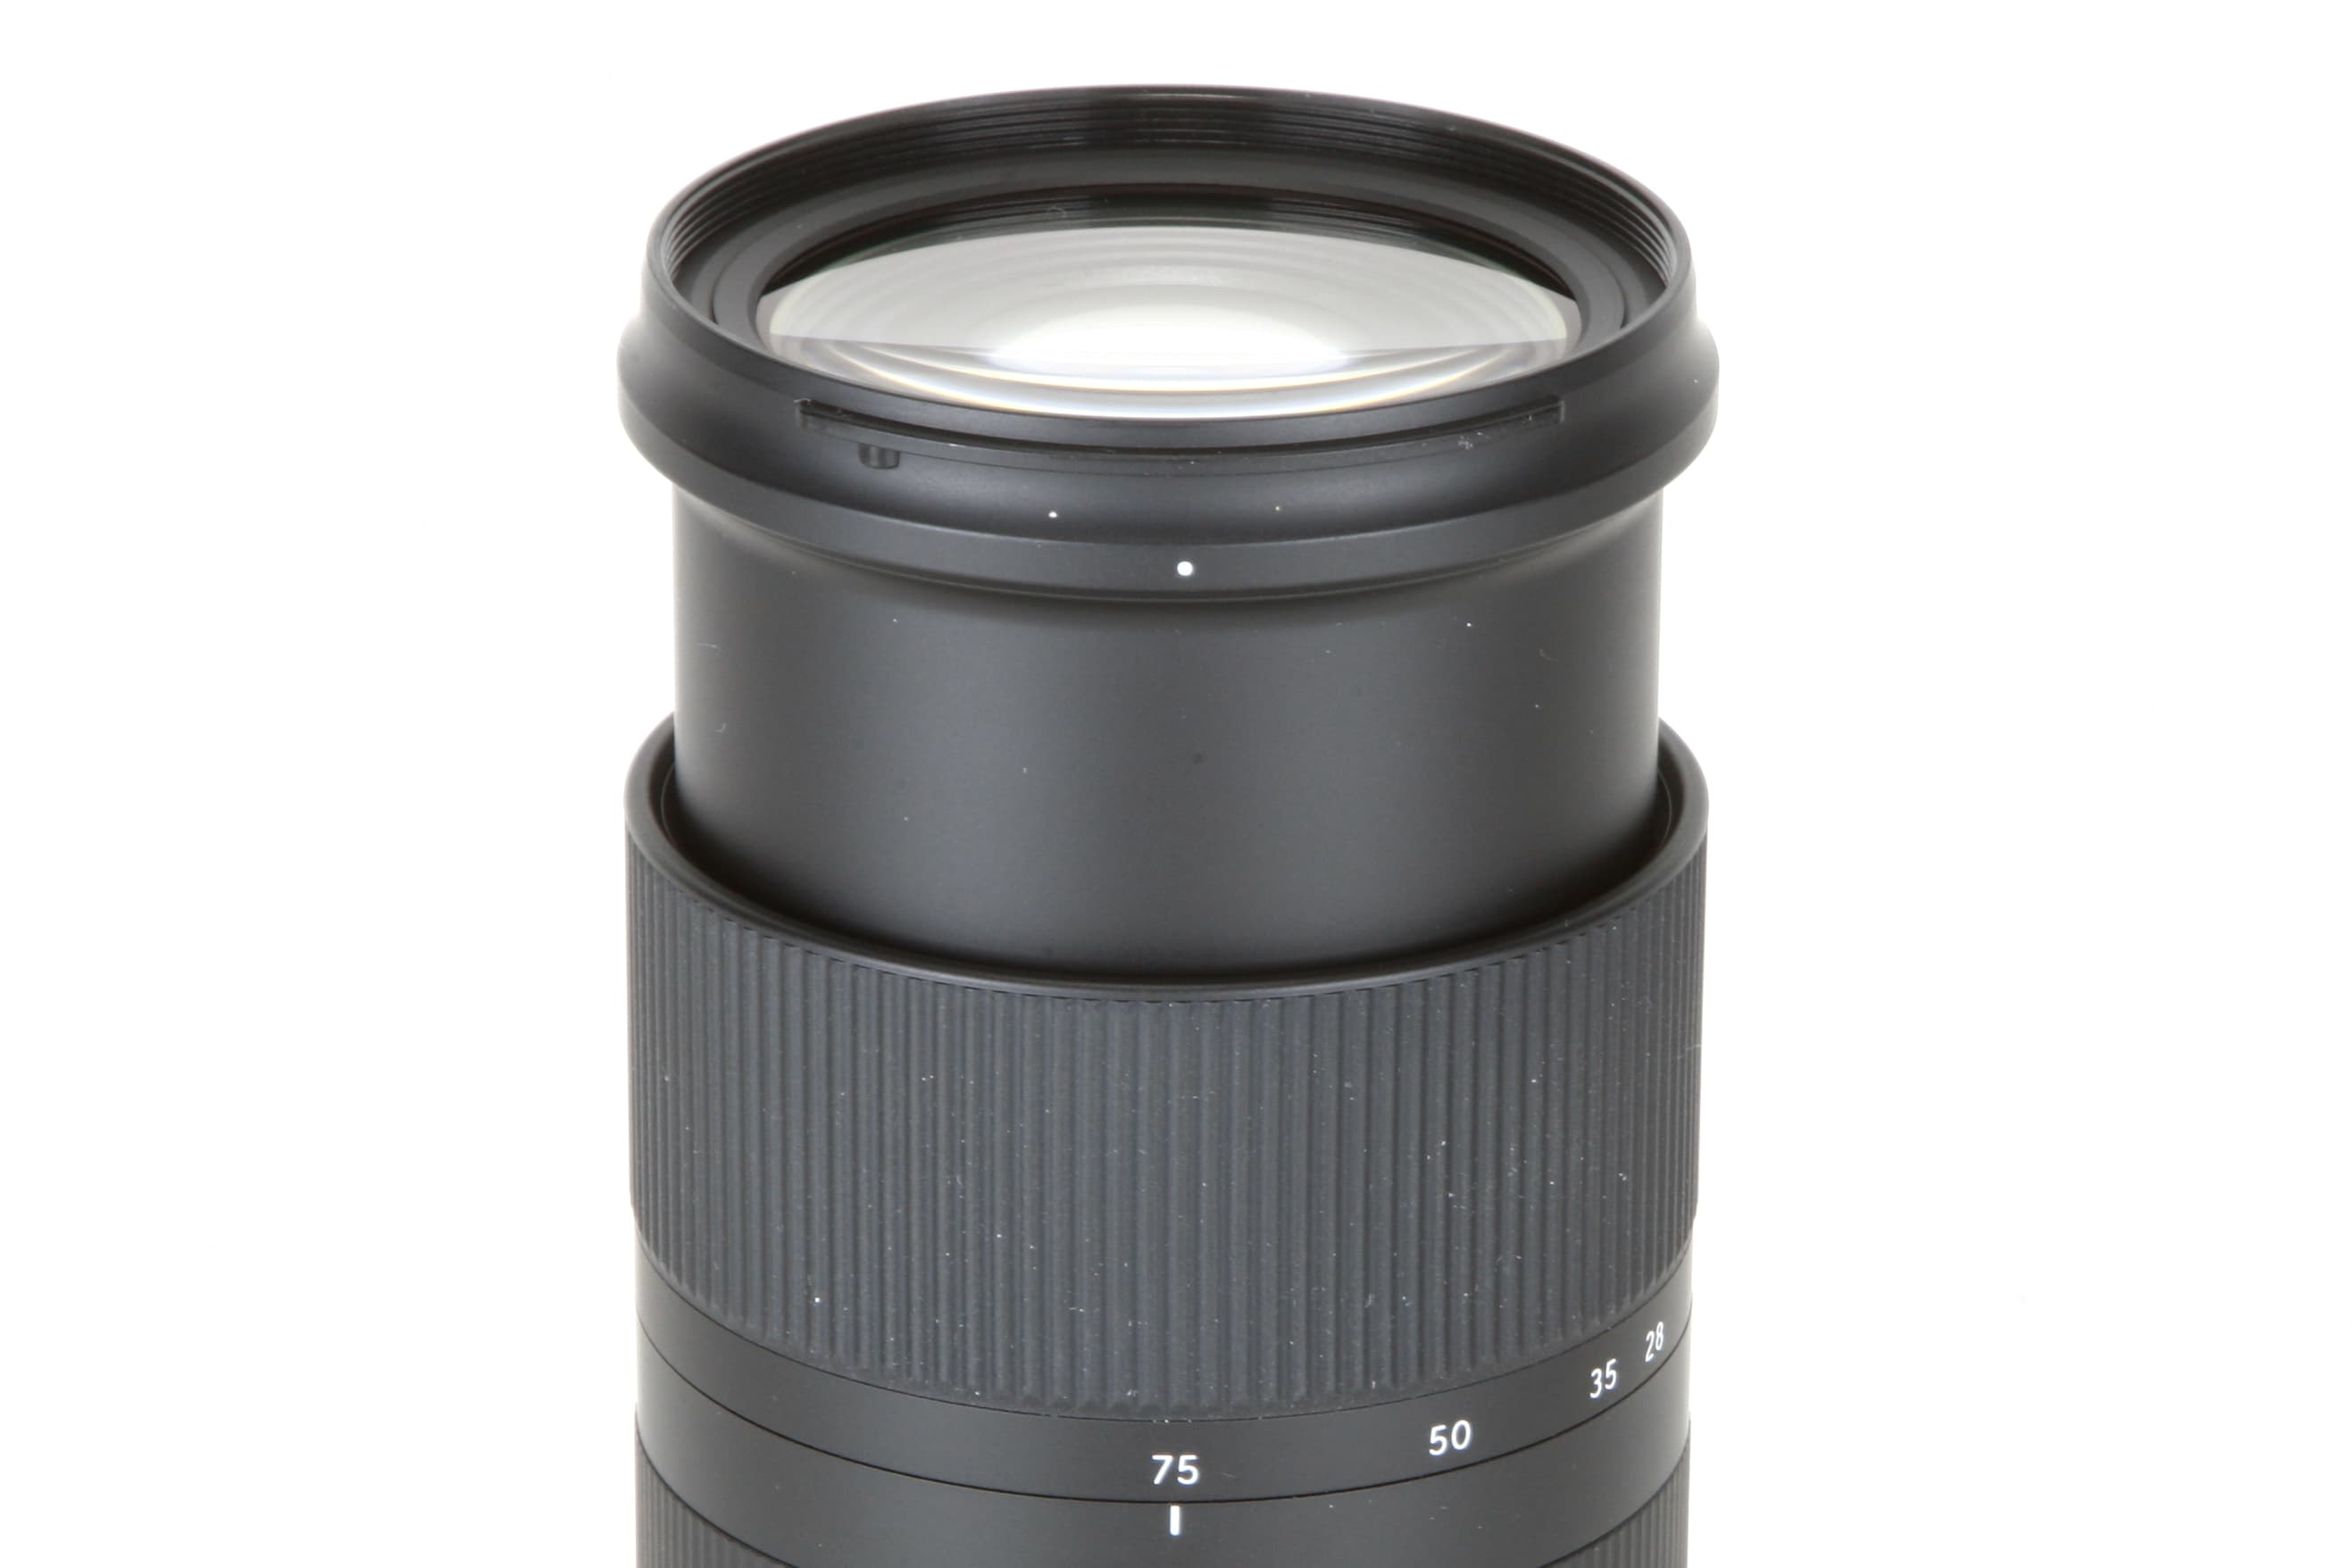 New Tamron 28-75 f/2.8 Lens: Their First for Sony FE-Mount - Light And  Matter